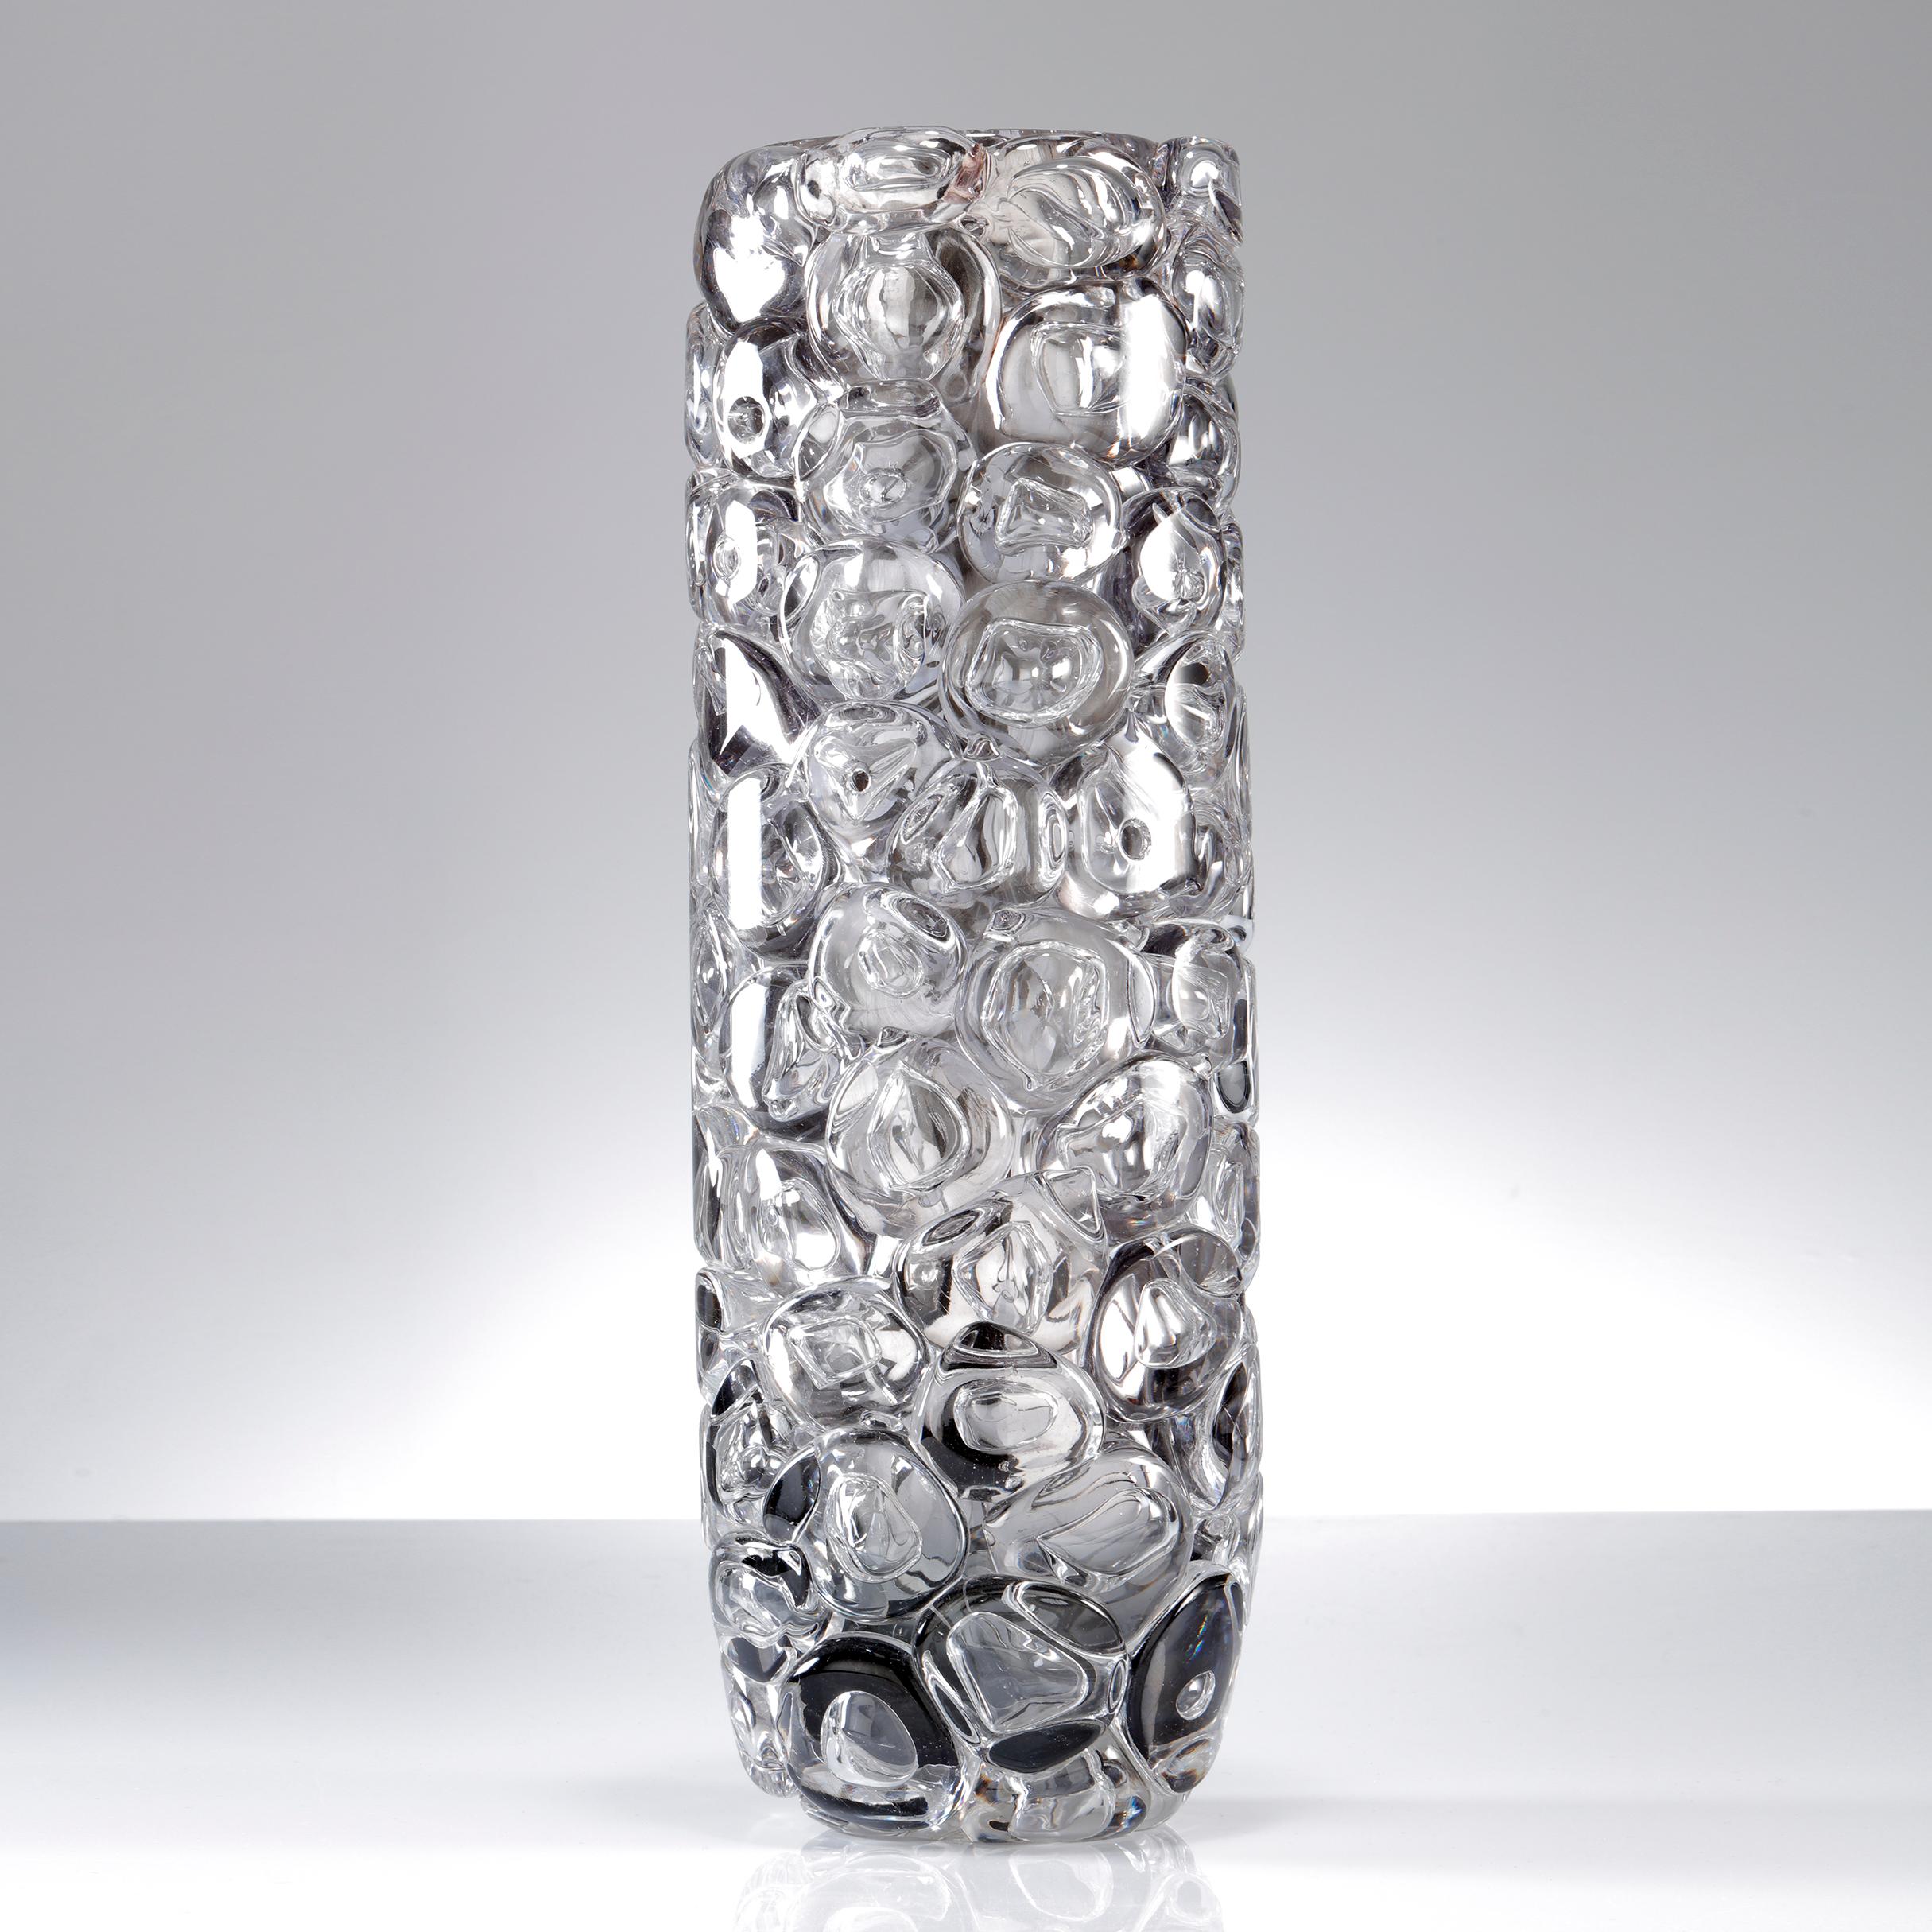 Bubblewrap in Monochrome II, a Silver and Clear Glass Vase by Allister  Malcolm at 1stDibs